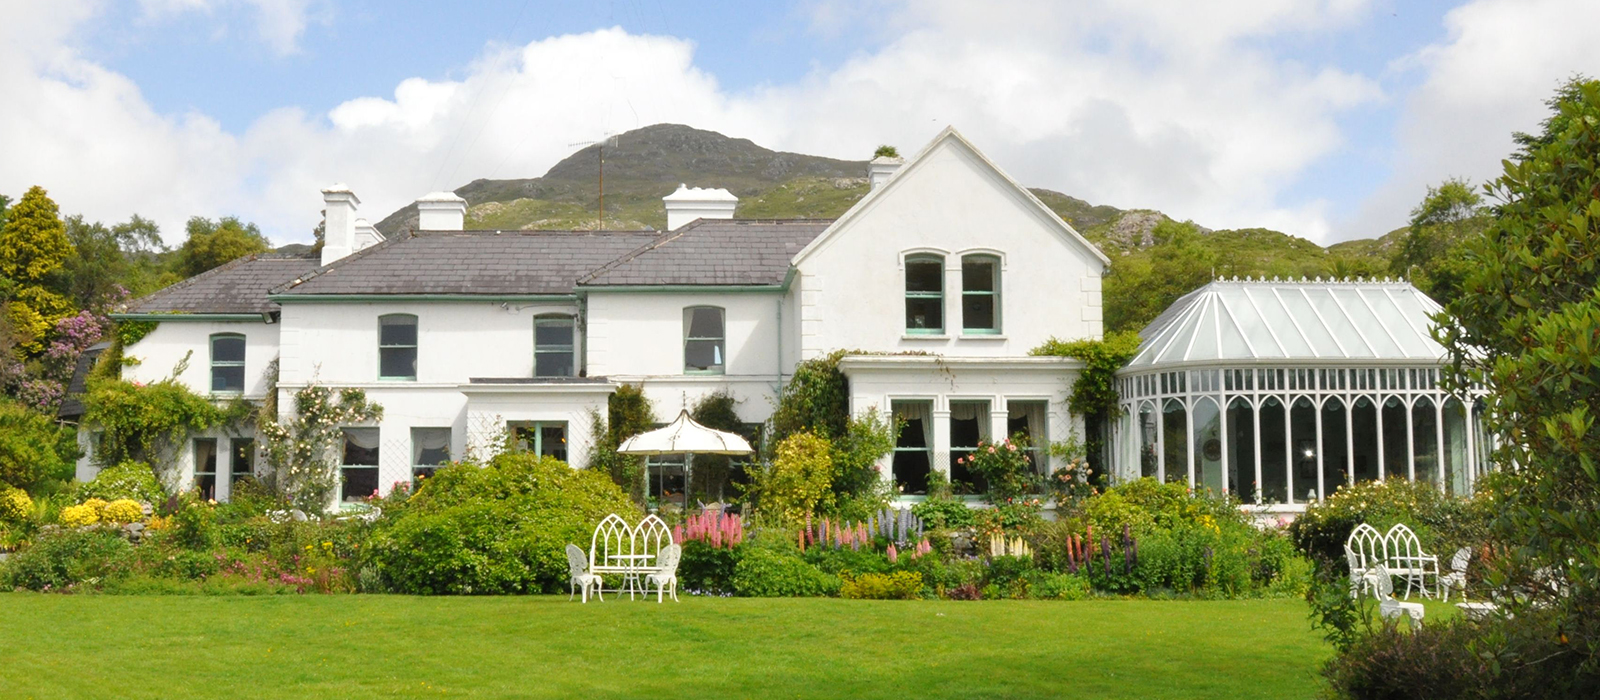 Cashel House - Country Manor House Hotel, Easter Offers Connemara and ...